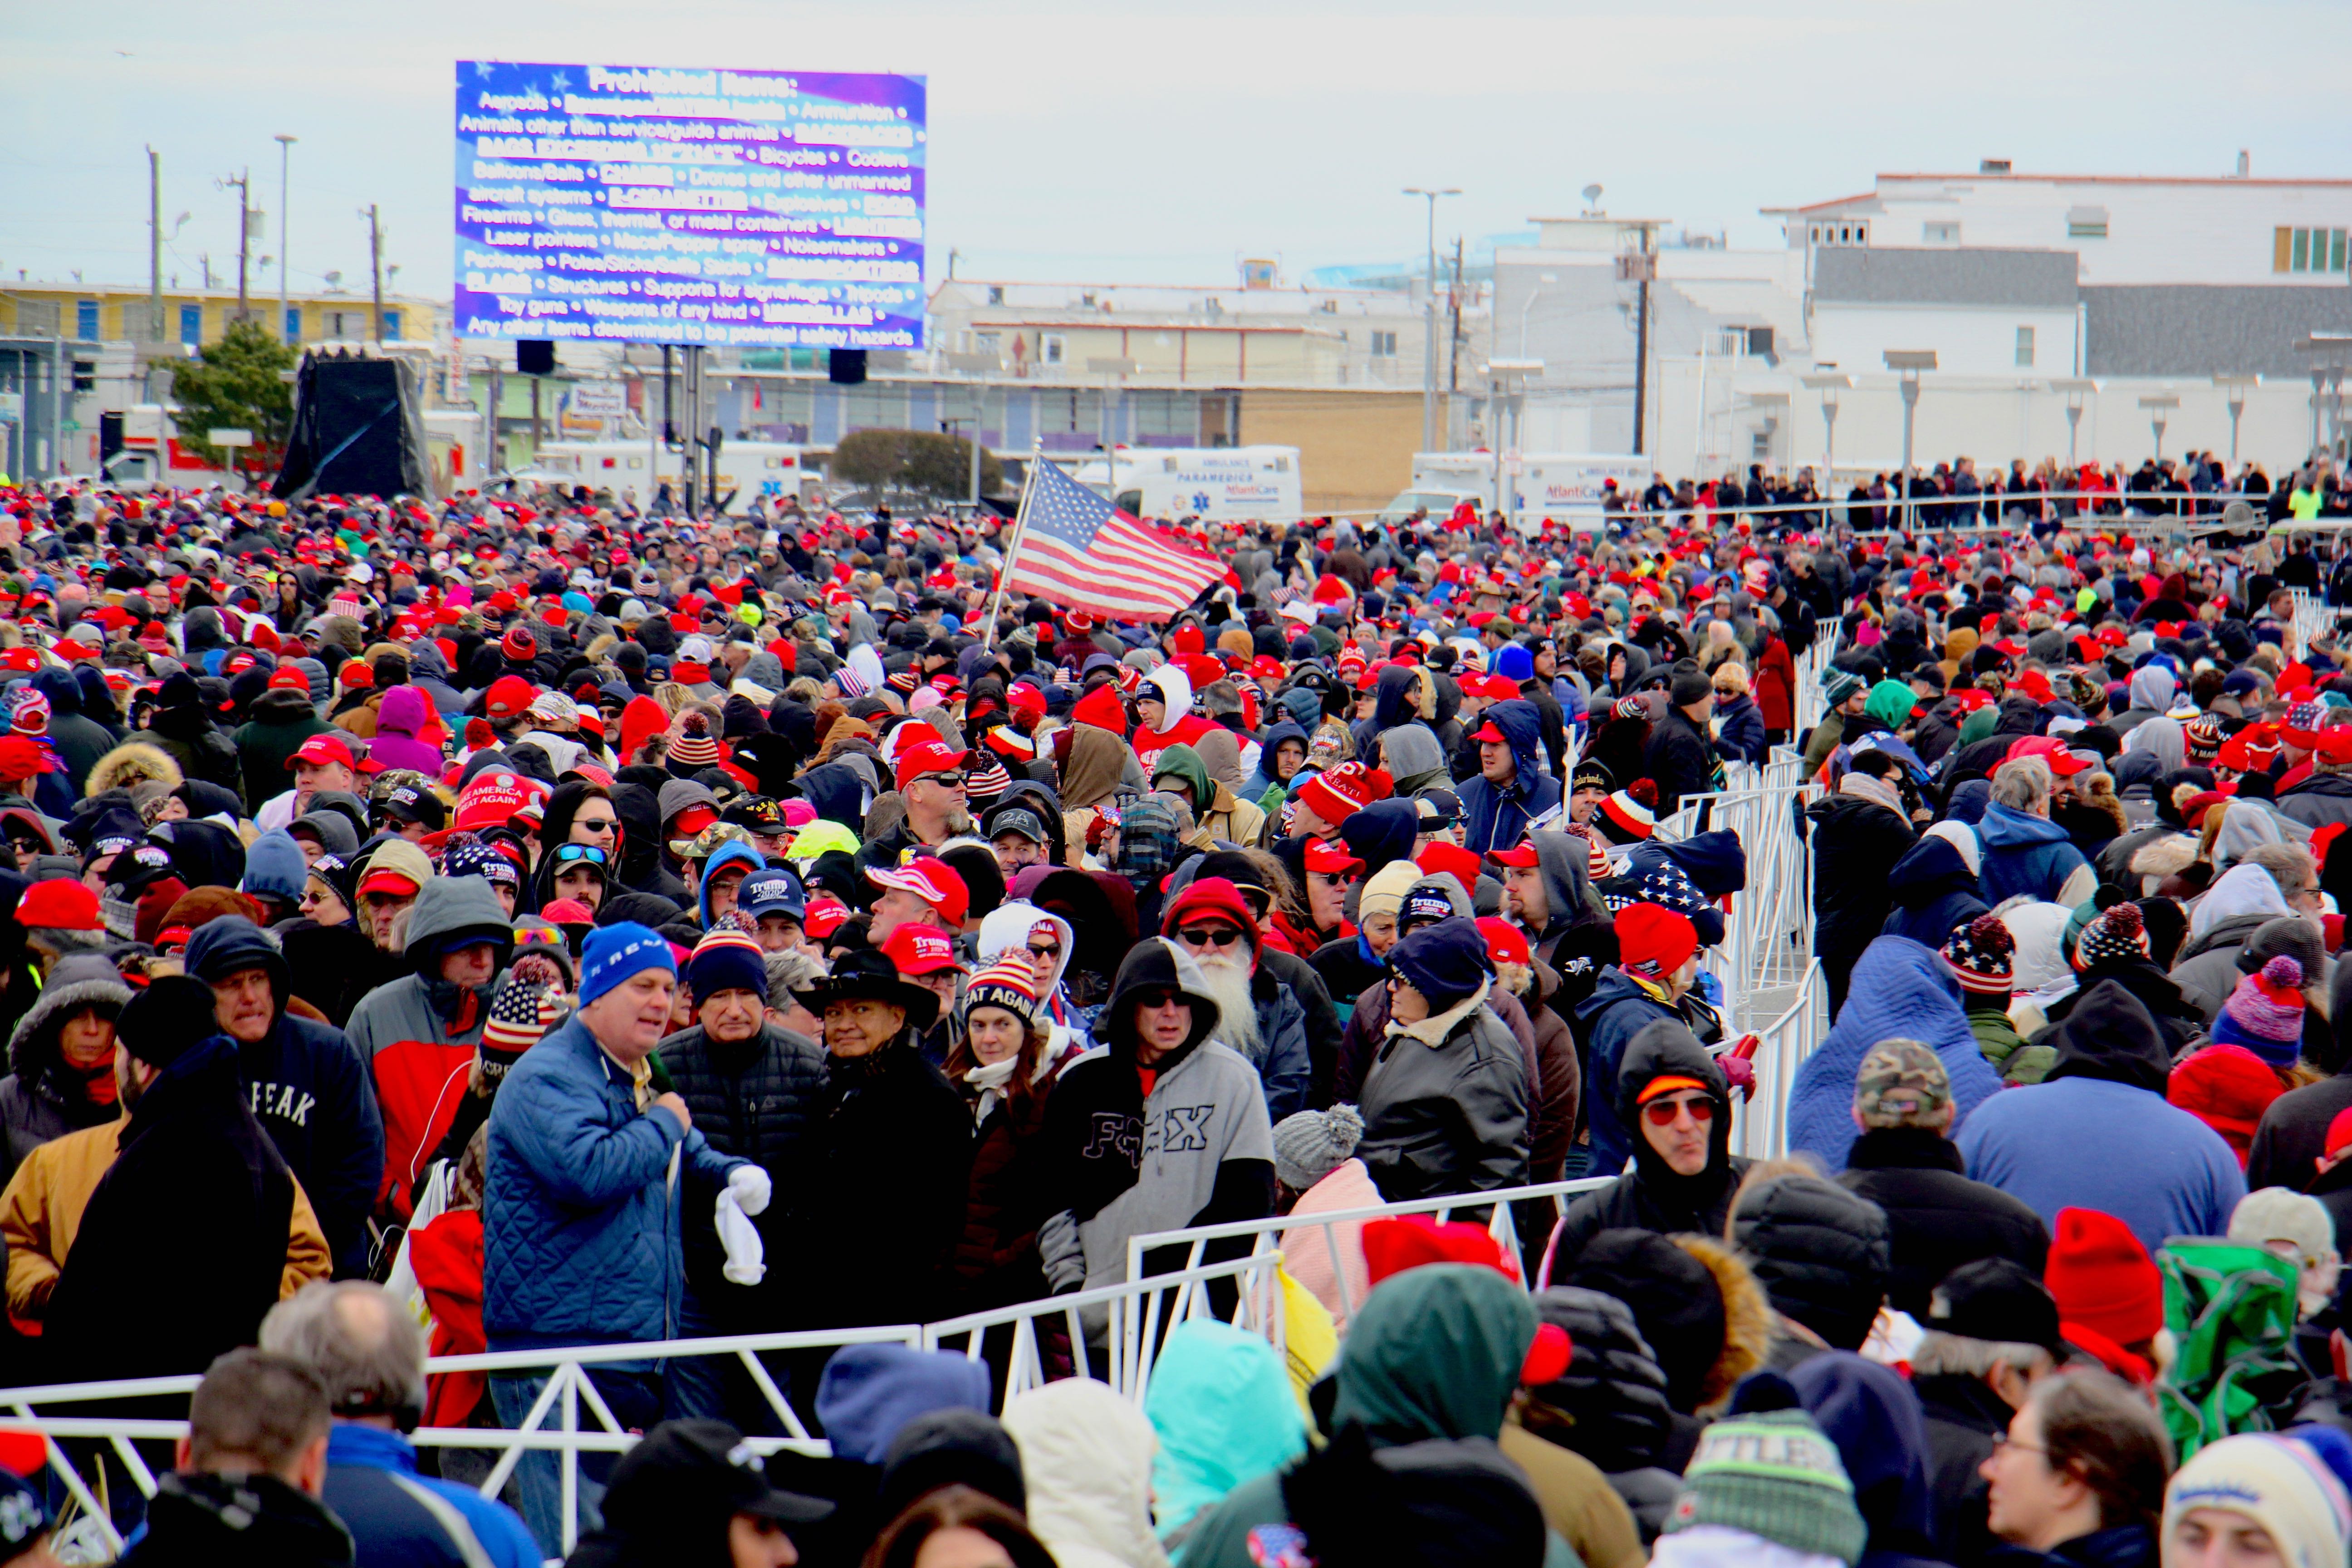 Trump’s rally in Wildwood draws tens of thousands WHYY